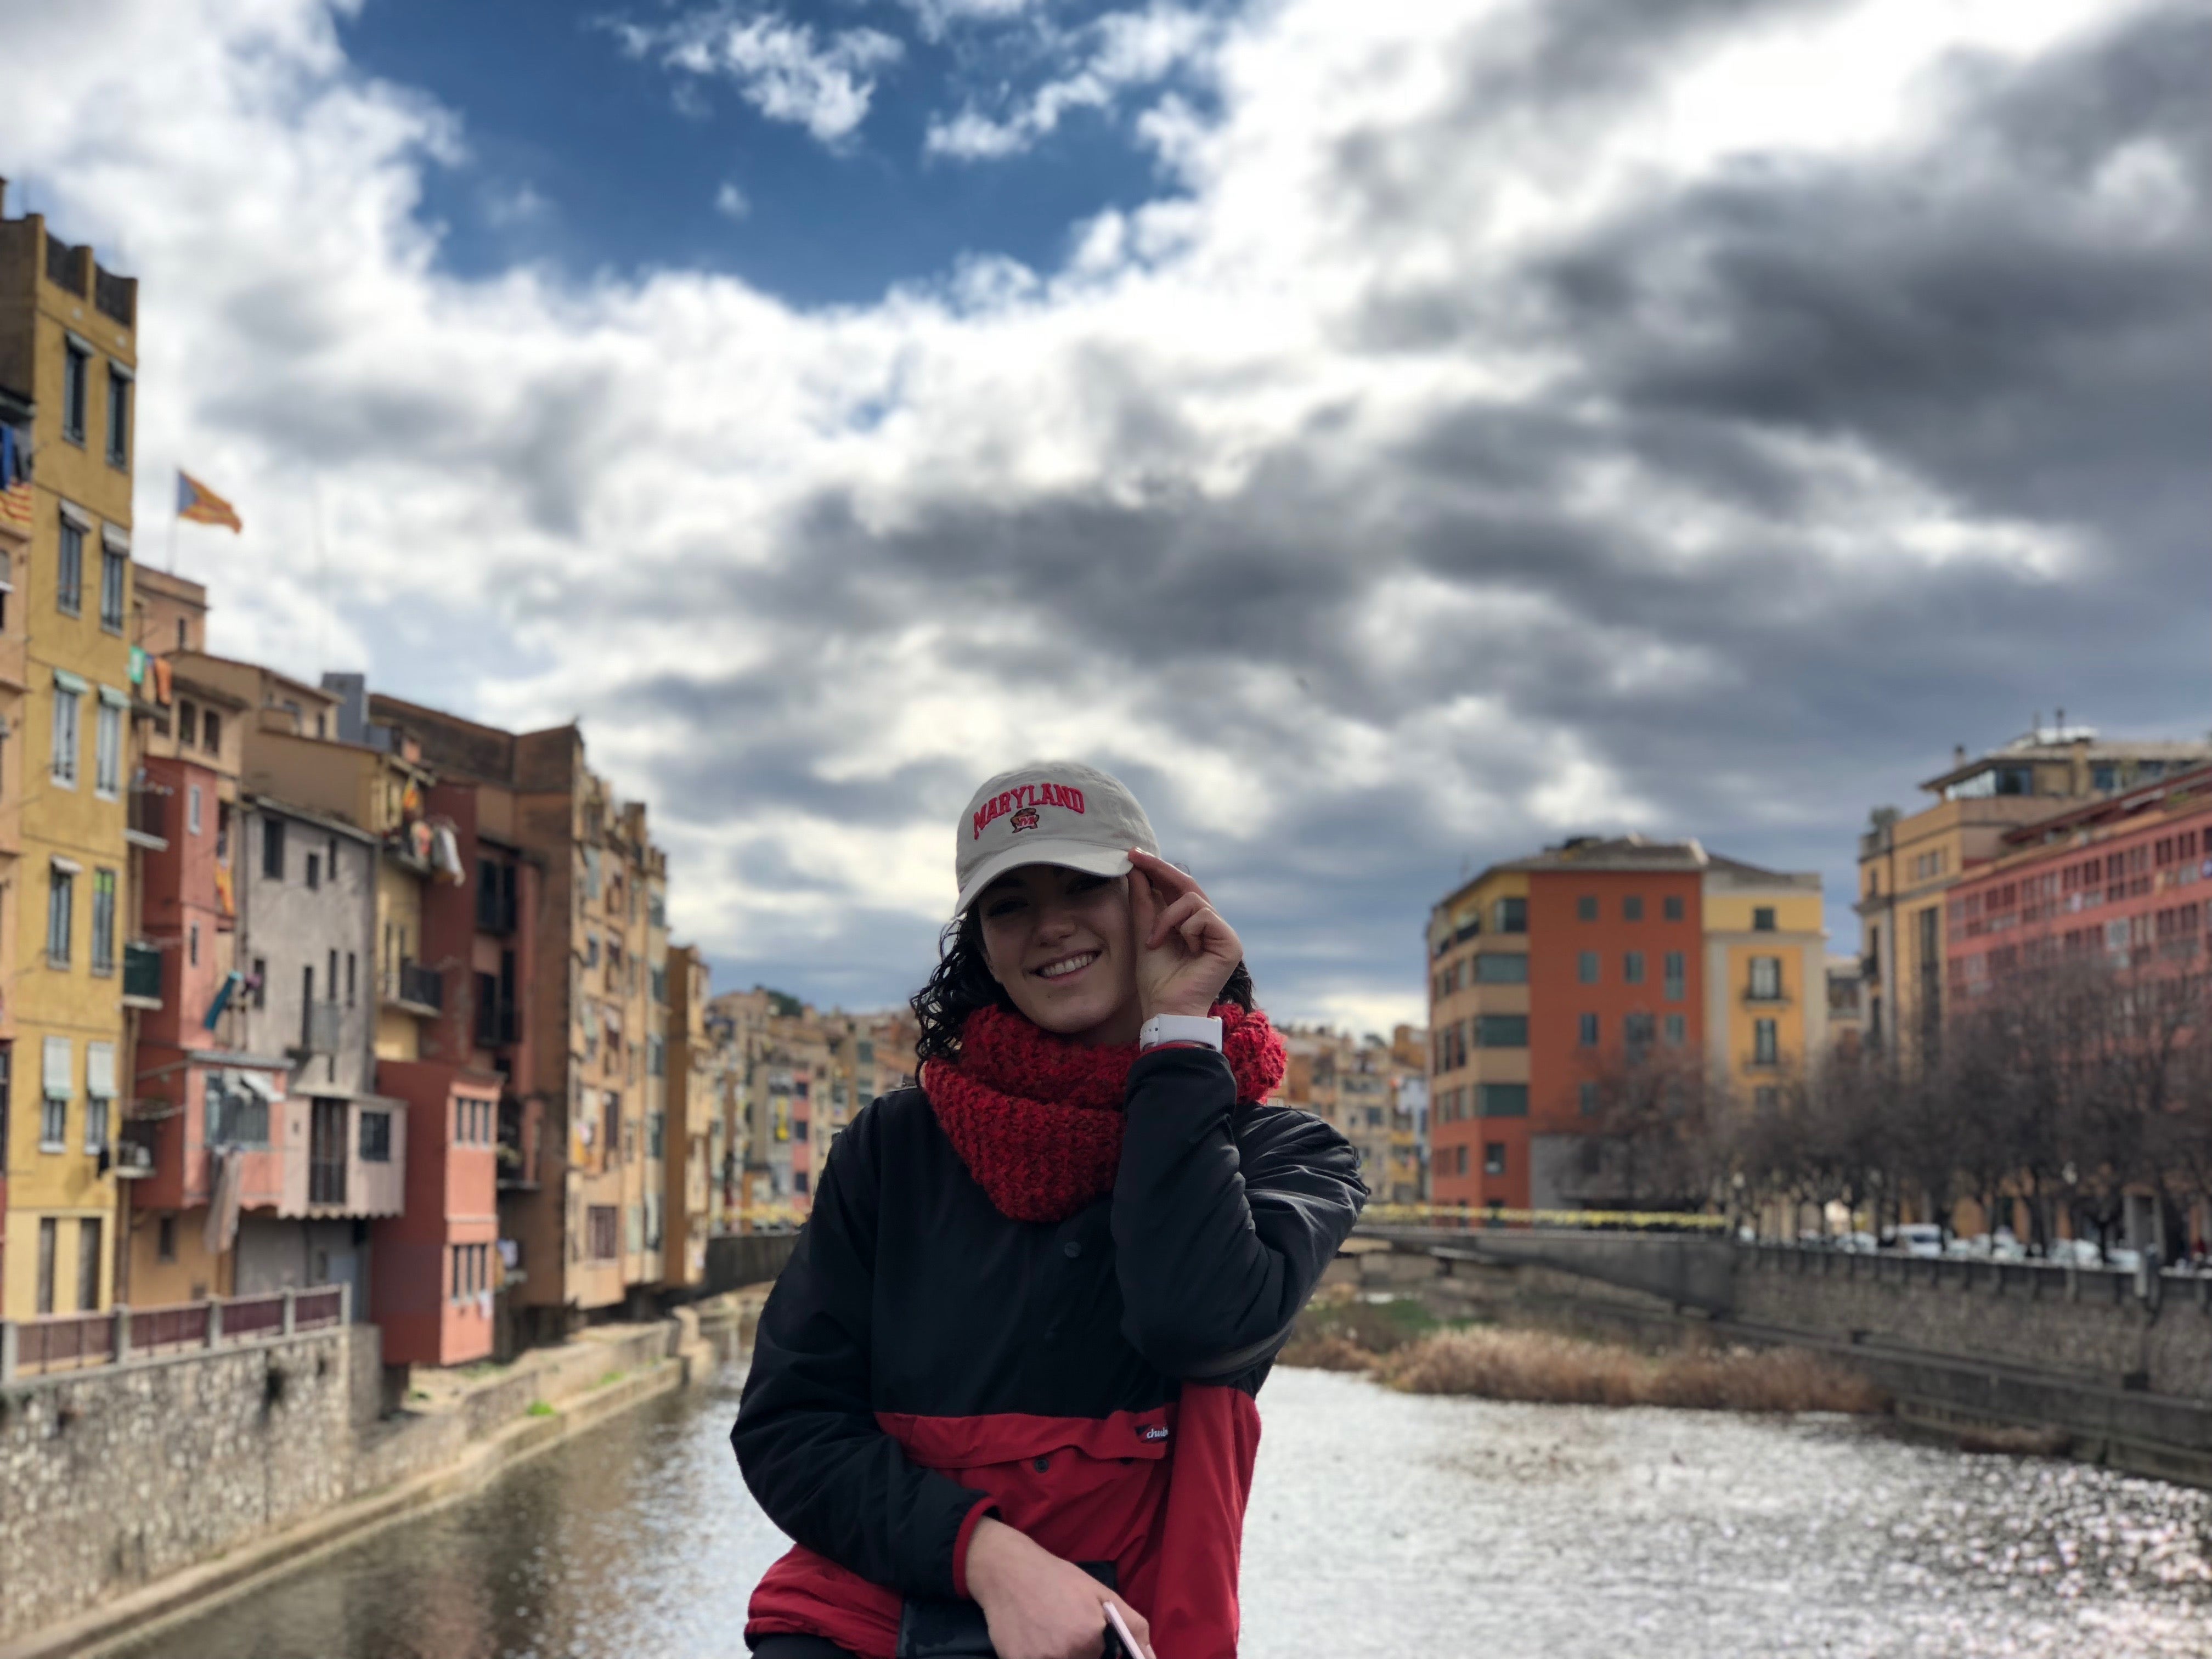 A student poses in front of a canal in Europe. She proudly wears a Maryland baseball cap.